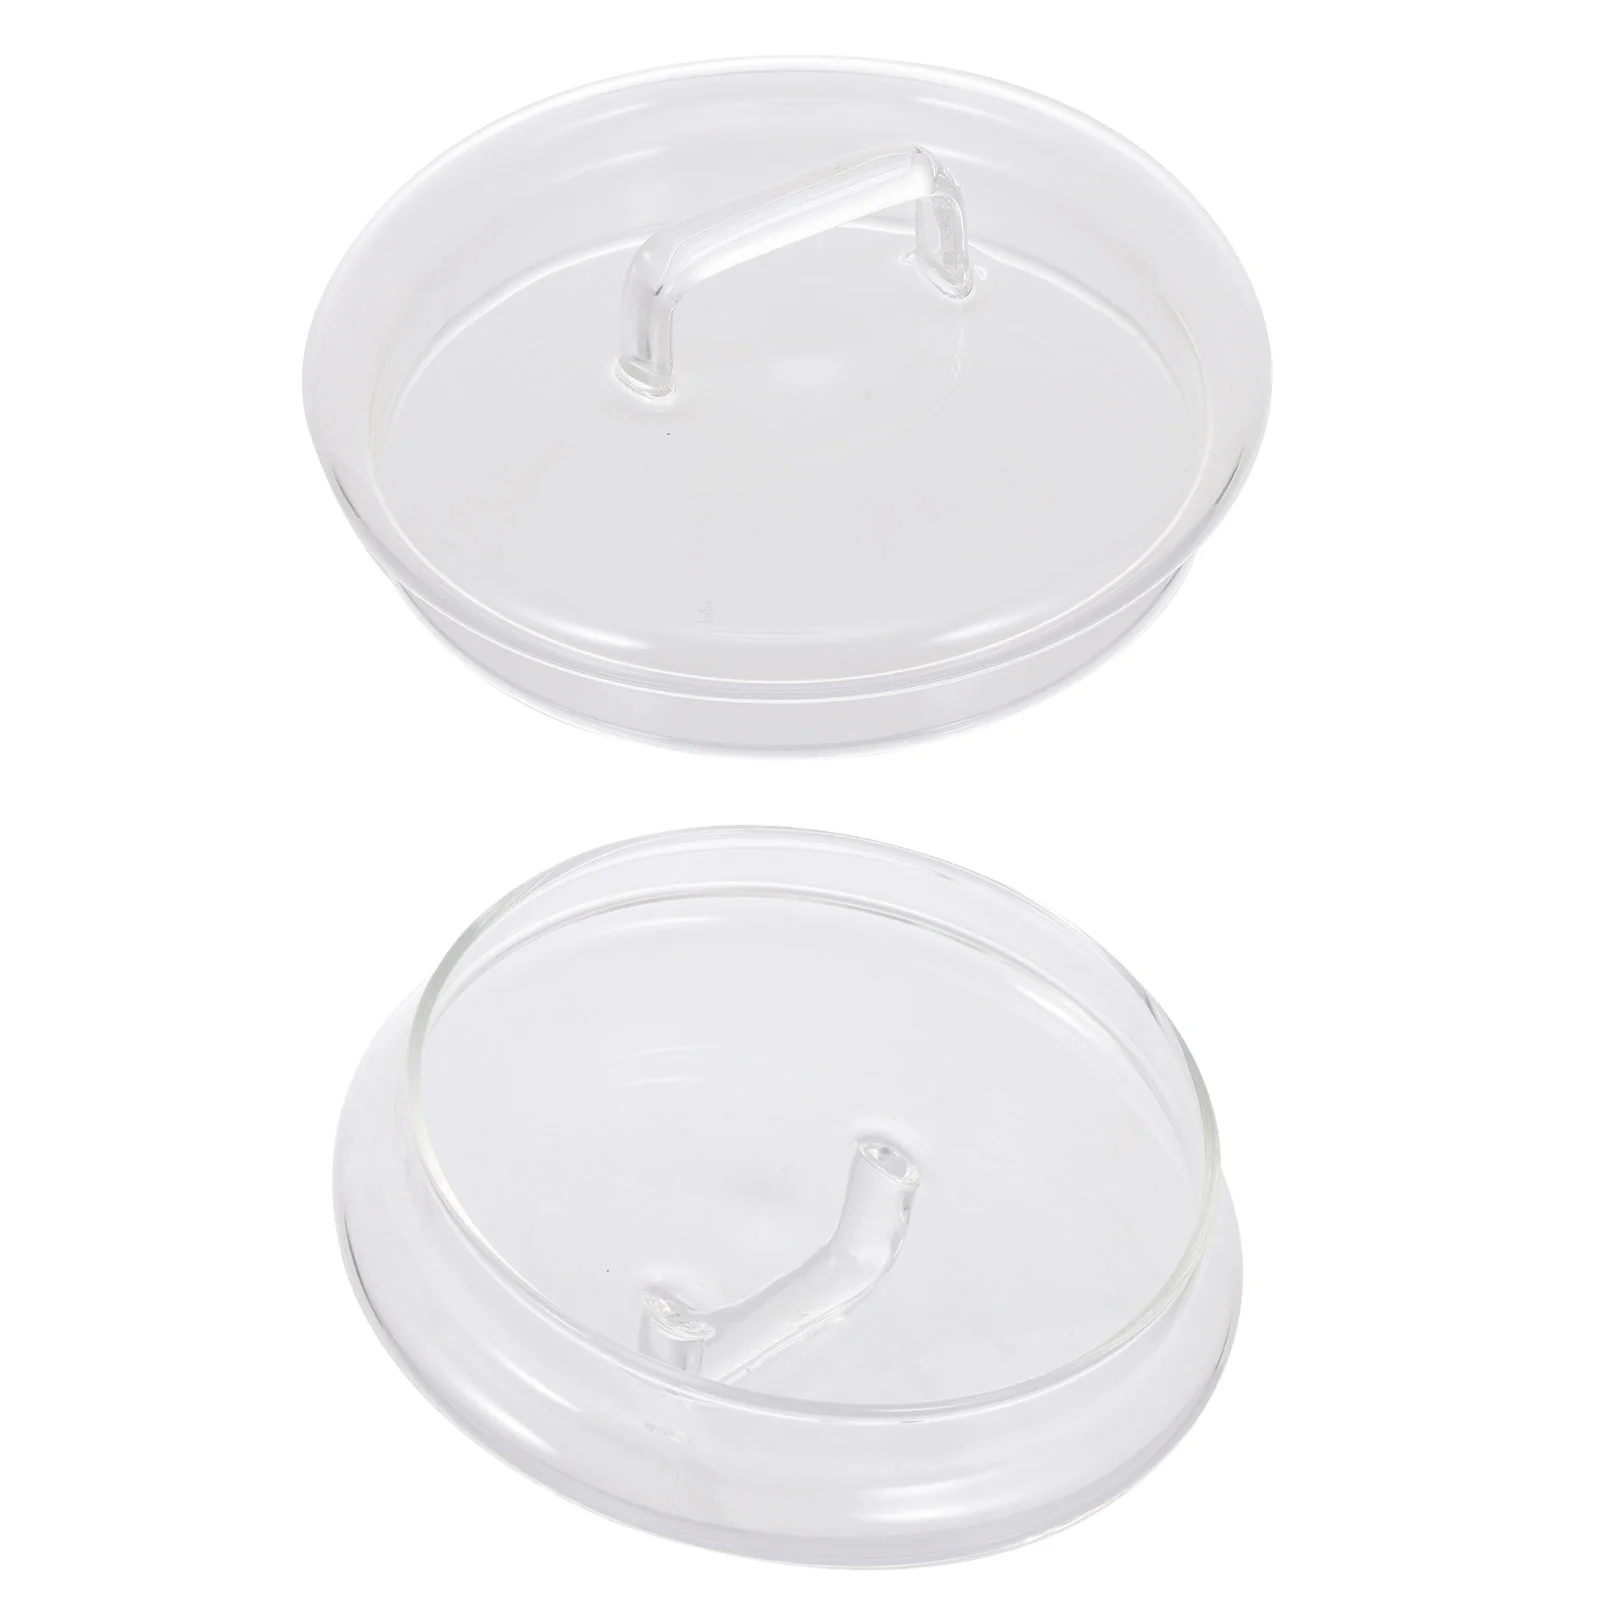 

Lids Jar Replacement Cover Lid Cake Dome Bottle Dispenser Covers Server Beverage Canisters Sealed Storage Coffee Tray Jars